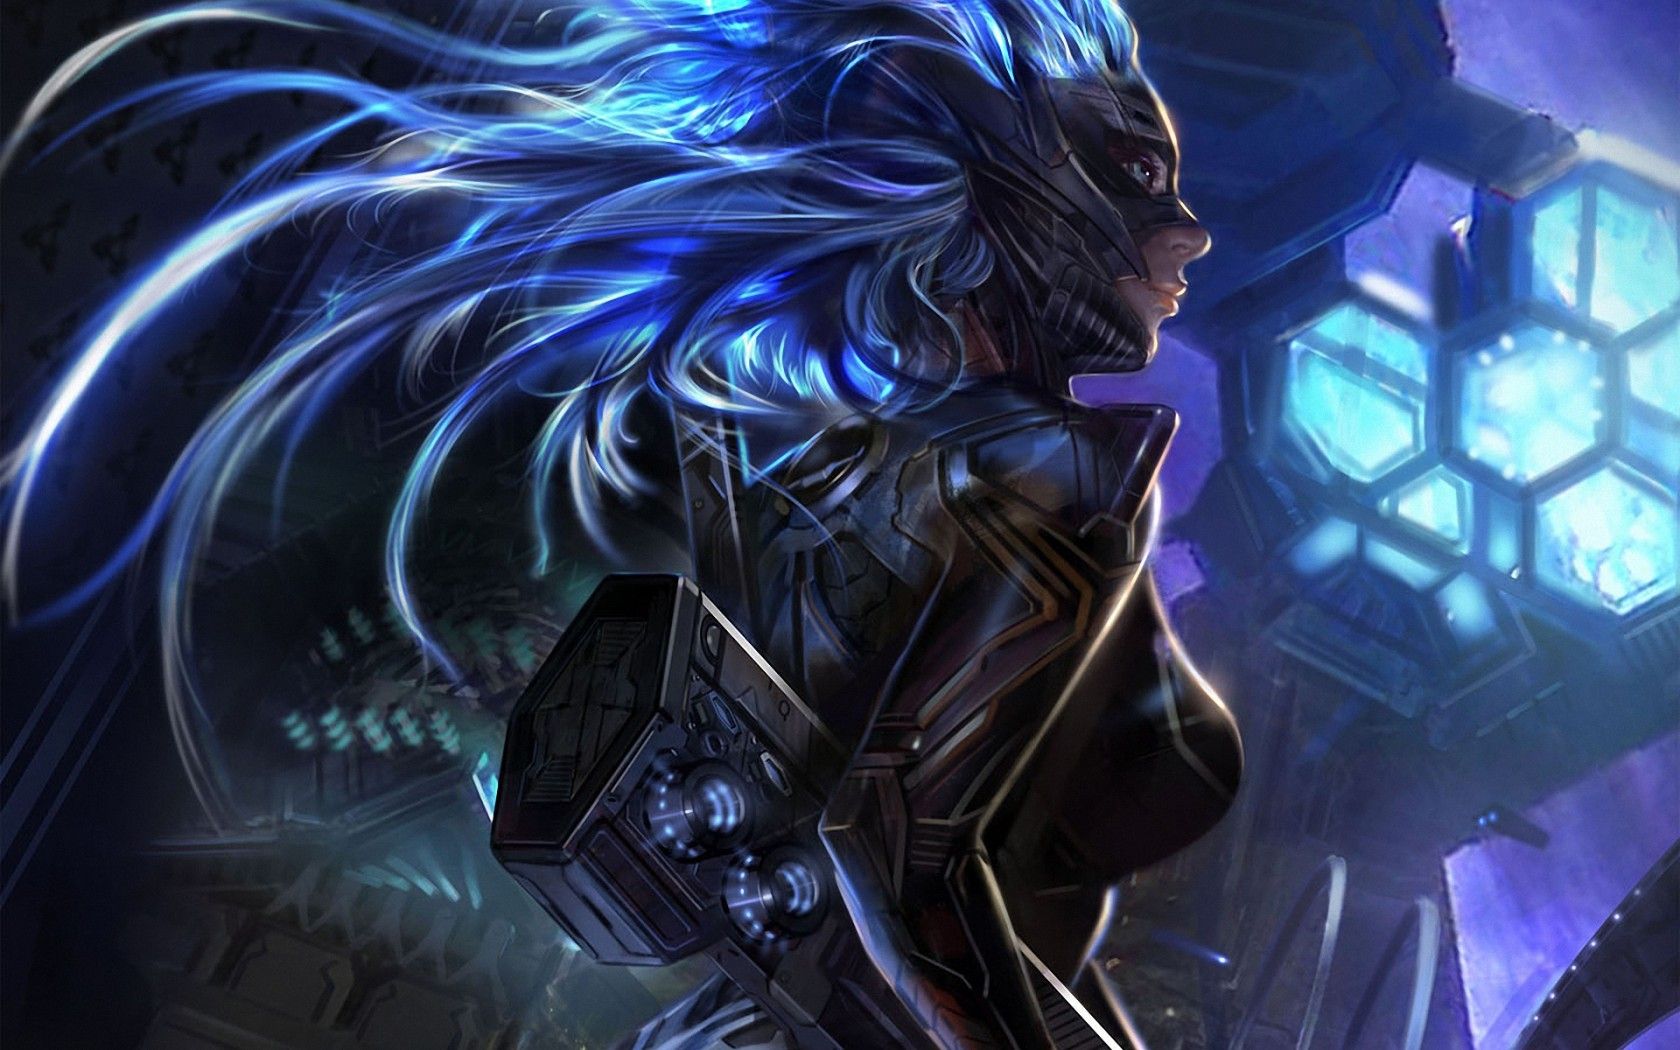 women, video games, futuristic, suit, weapons, blue hair, Galaxy